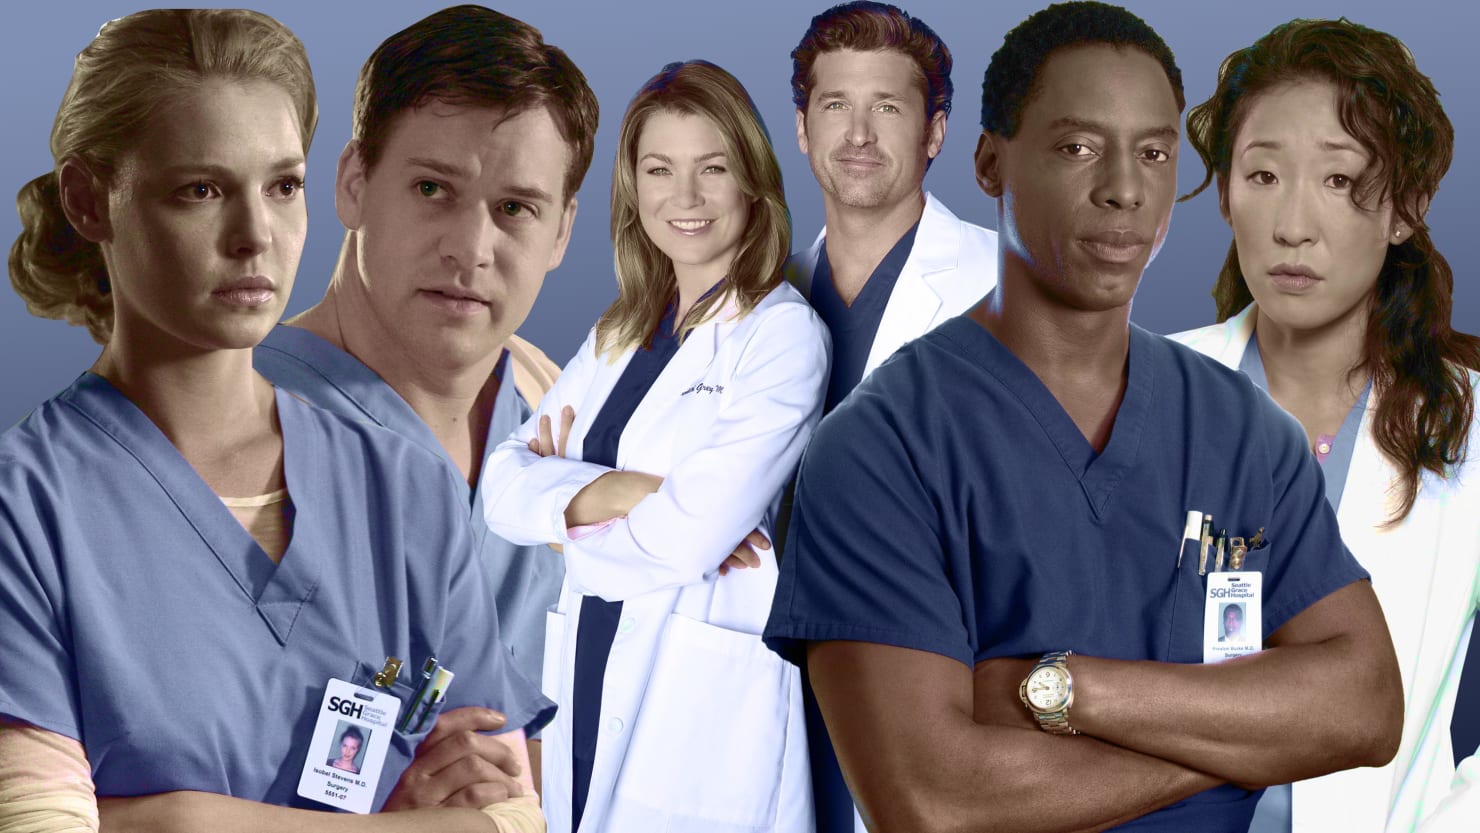 Inside ‘grey’s Anatomy’s’ Many Behind The Scenes Scandals From Diva Antics To Sudden Exits